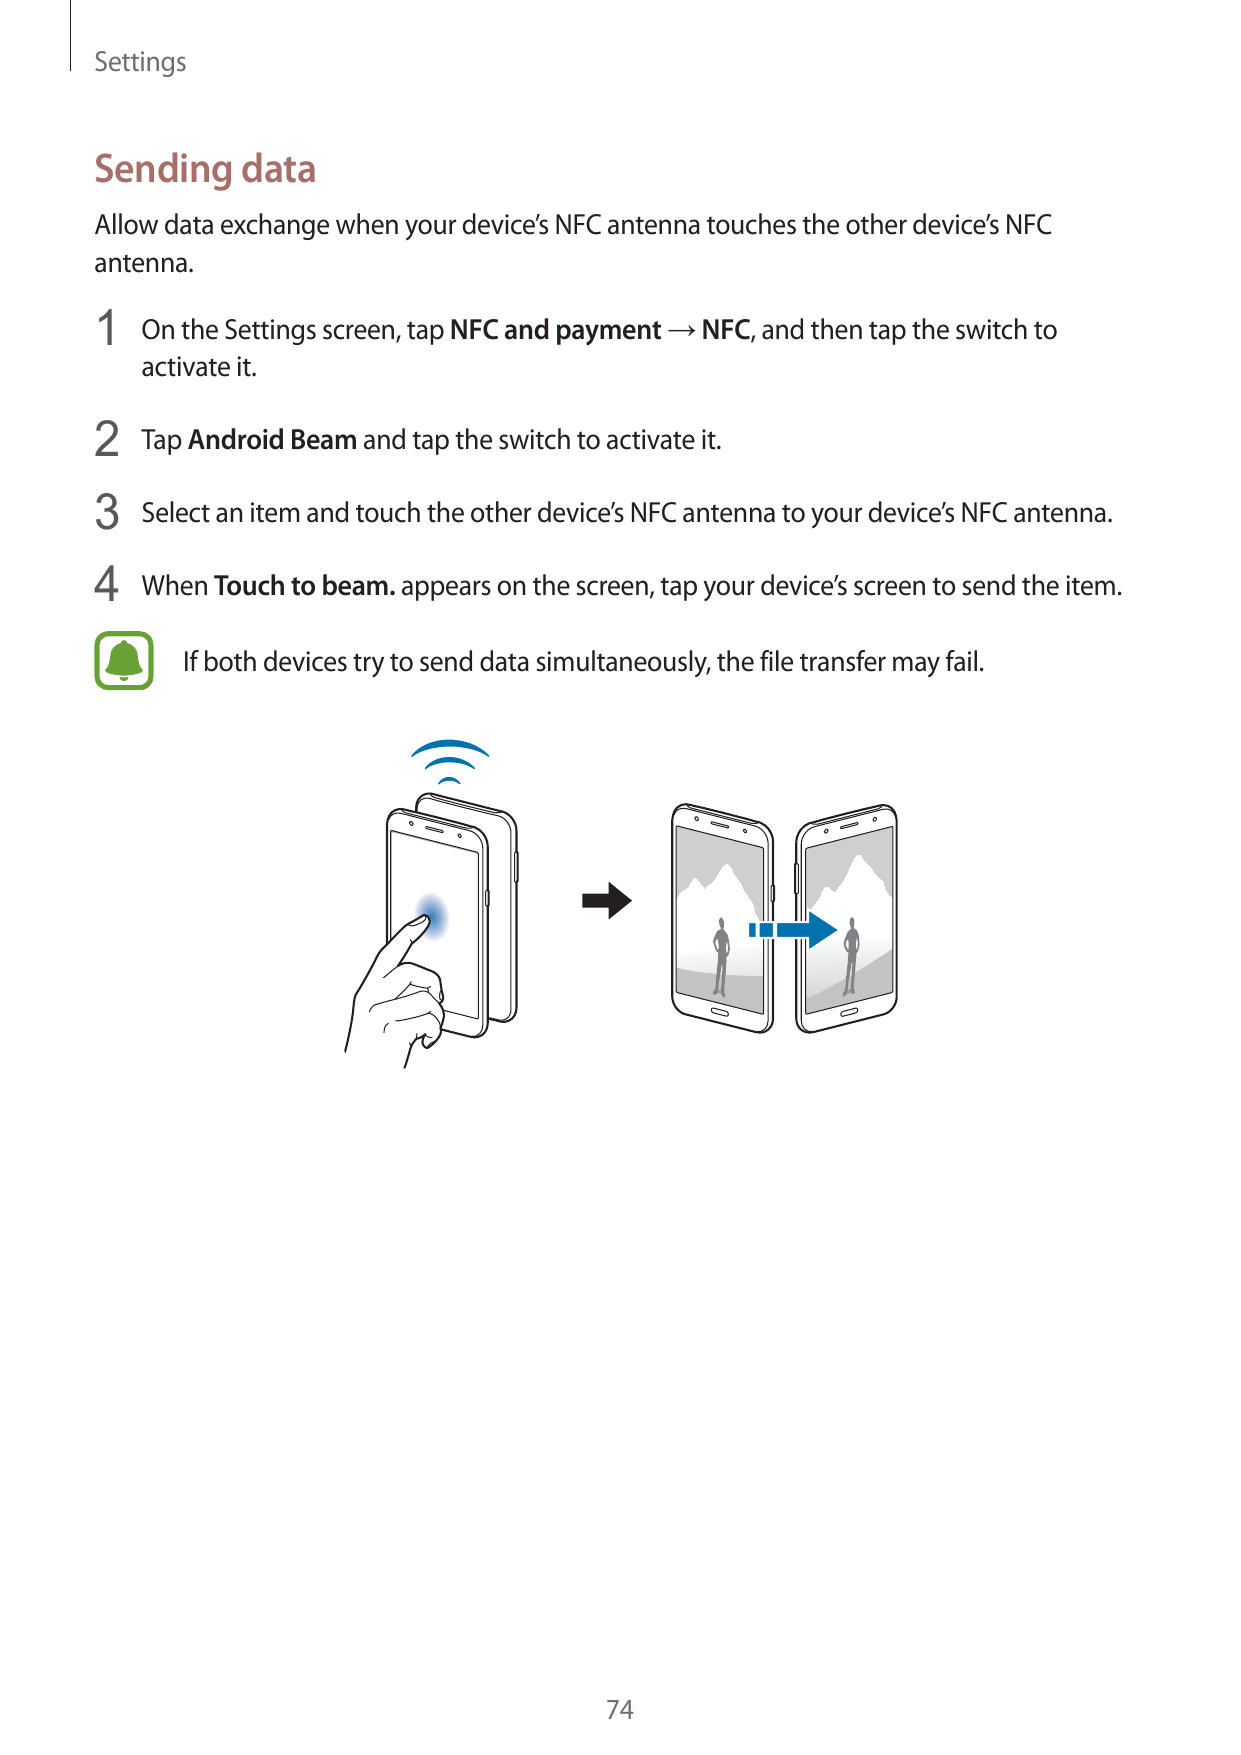 SettingsSending dataAllow data exchange when your device’s NFC antenna touches the other device’s NFCantenna.1234On the Settings